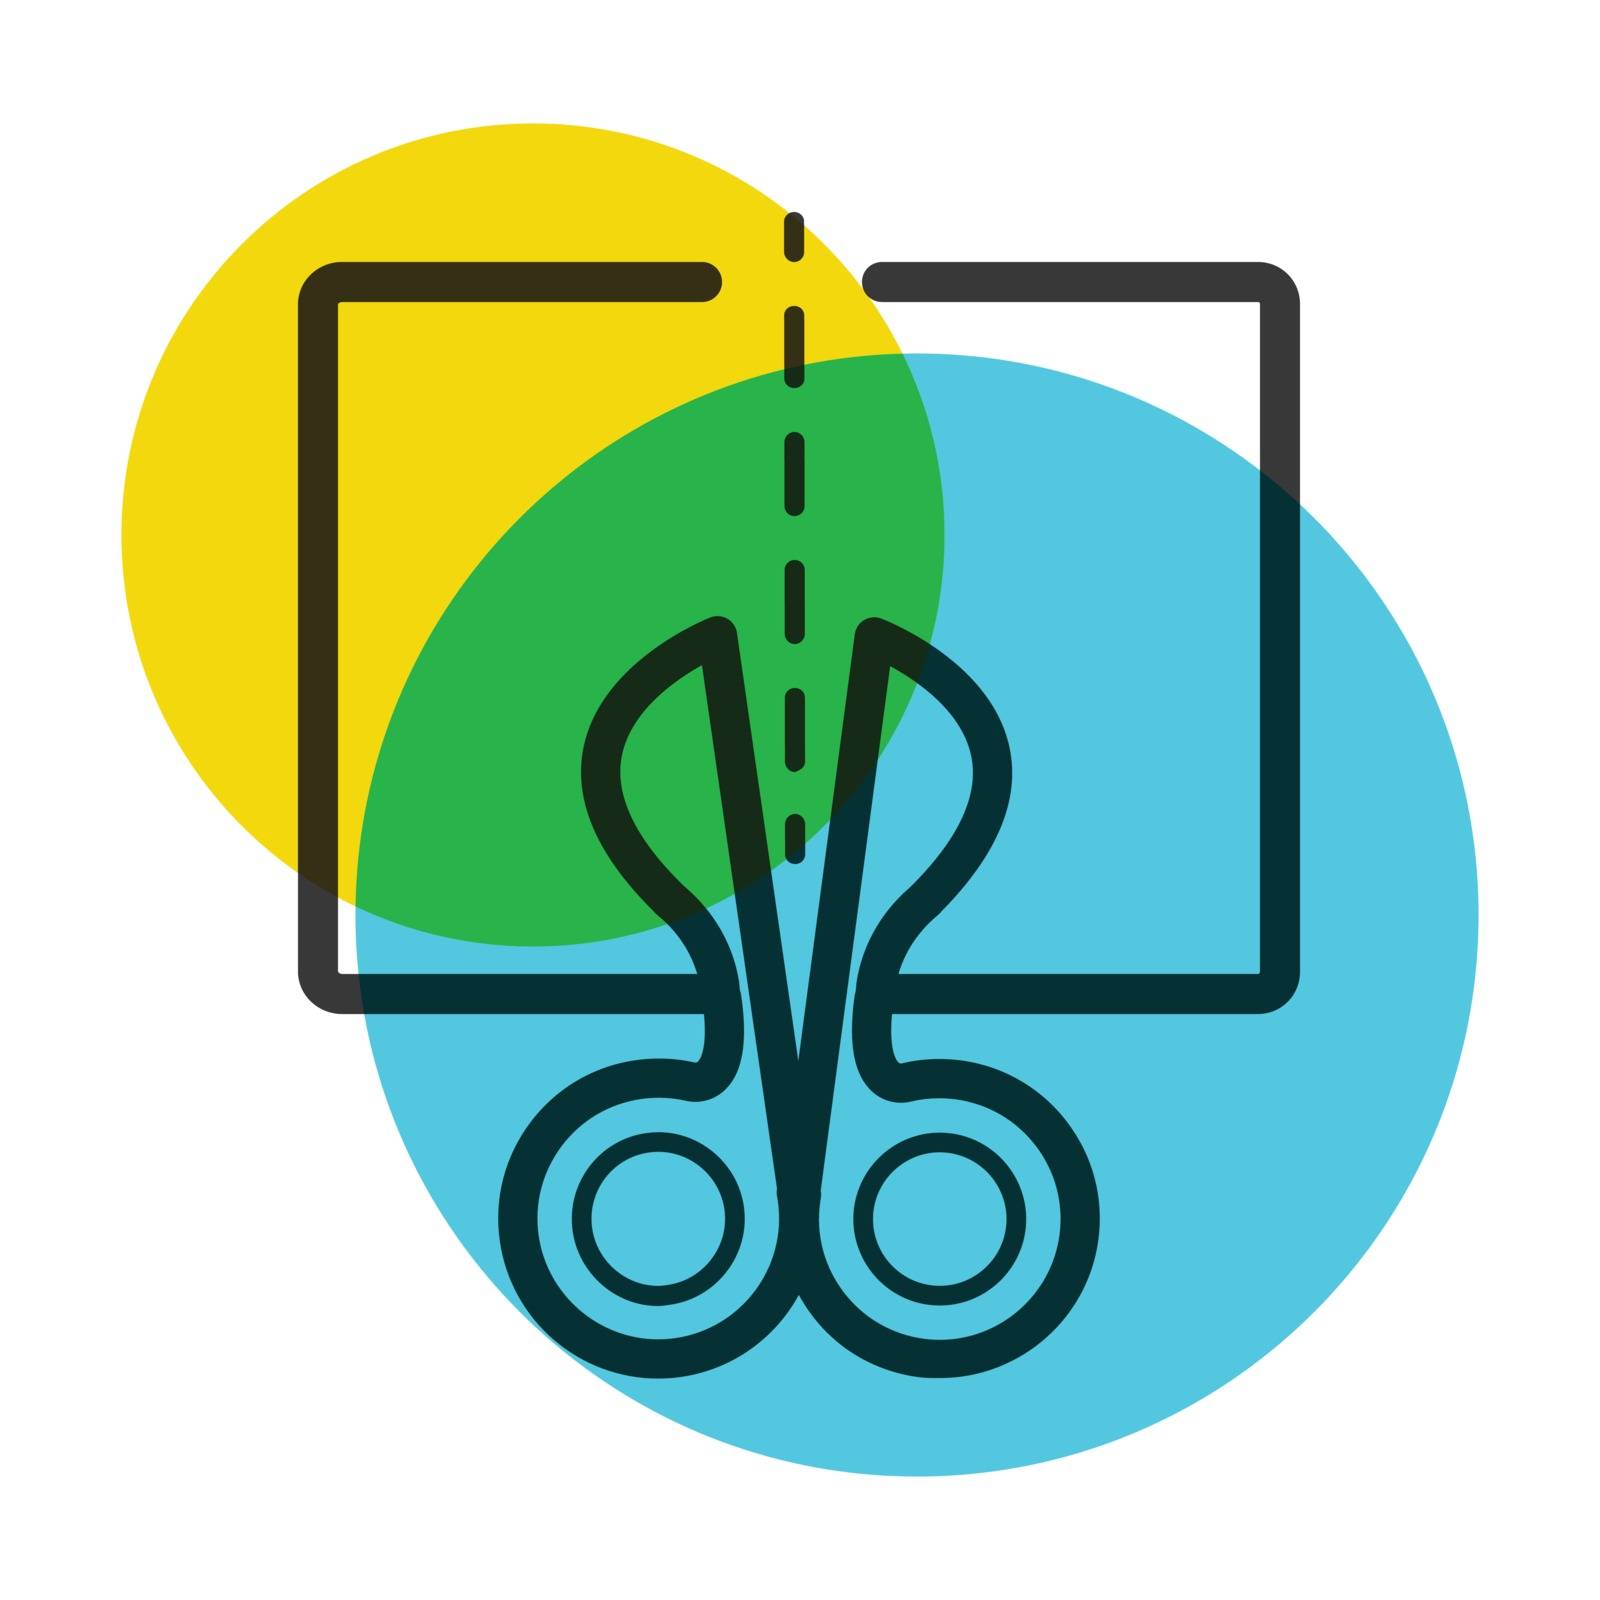 Scissors icon color mark by PAPAGraph